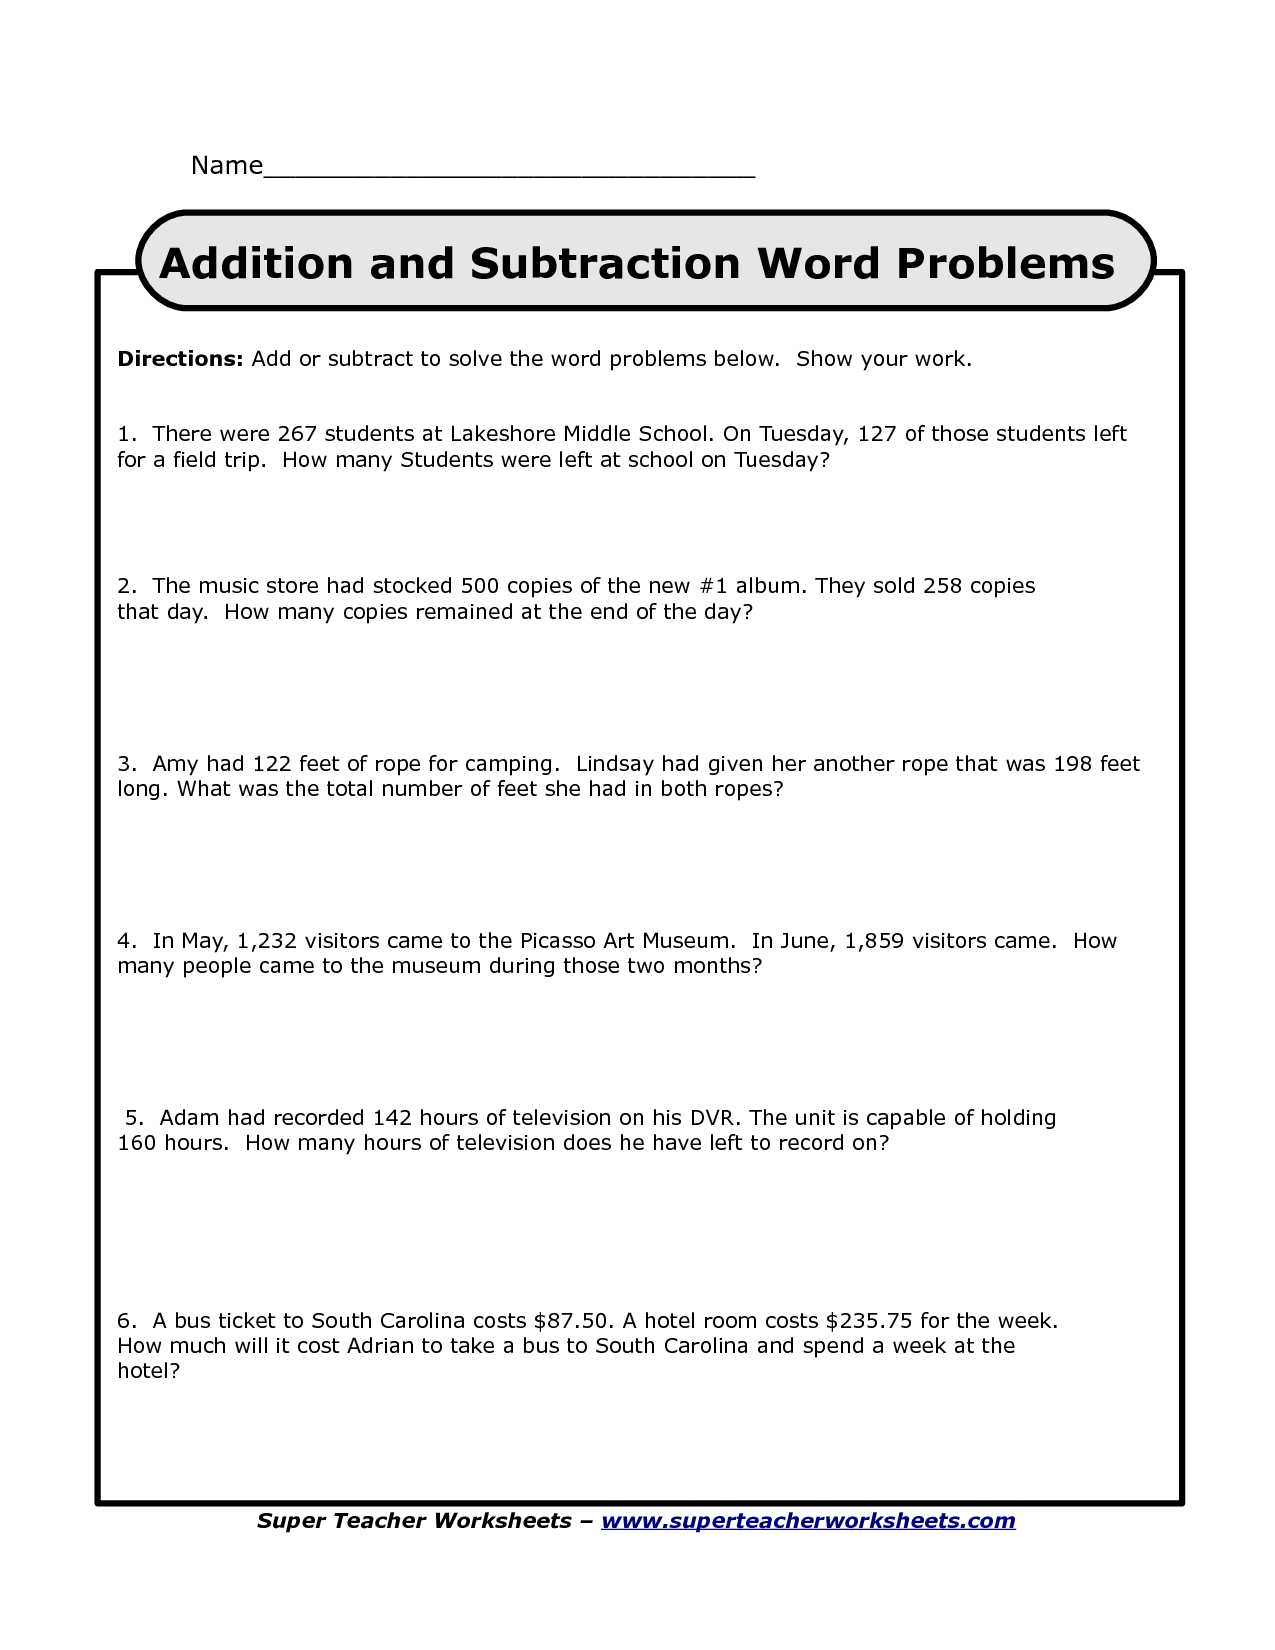 Adding and Subtracting Integers Word Problems Worksheet with Free Worksheets Library Download and Print Worksheets